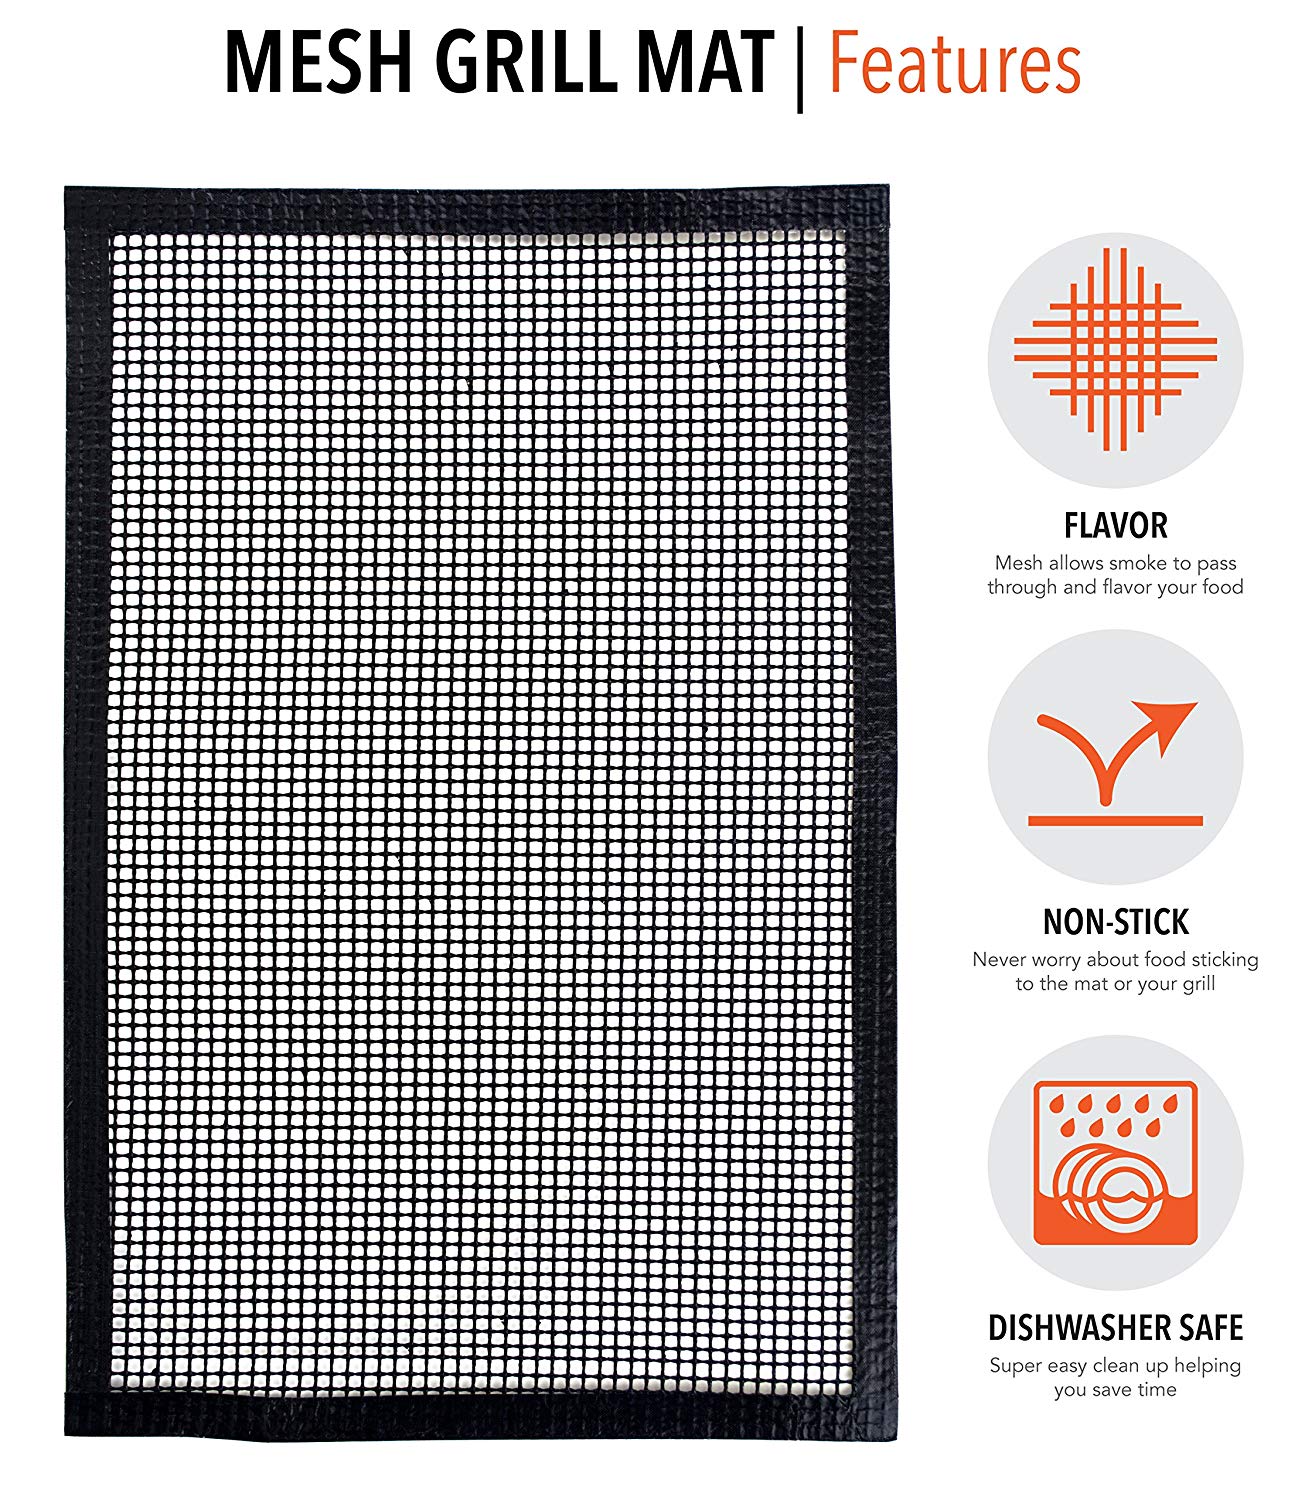 Grill Mat BBQ Tool - Mesh Grill Mat That Allows Smoke to Pass Through - Non-Stick - Perfect For Grills, Smokers and Ovens - image 3 of 6